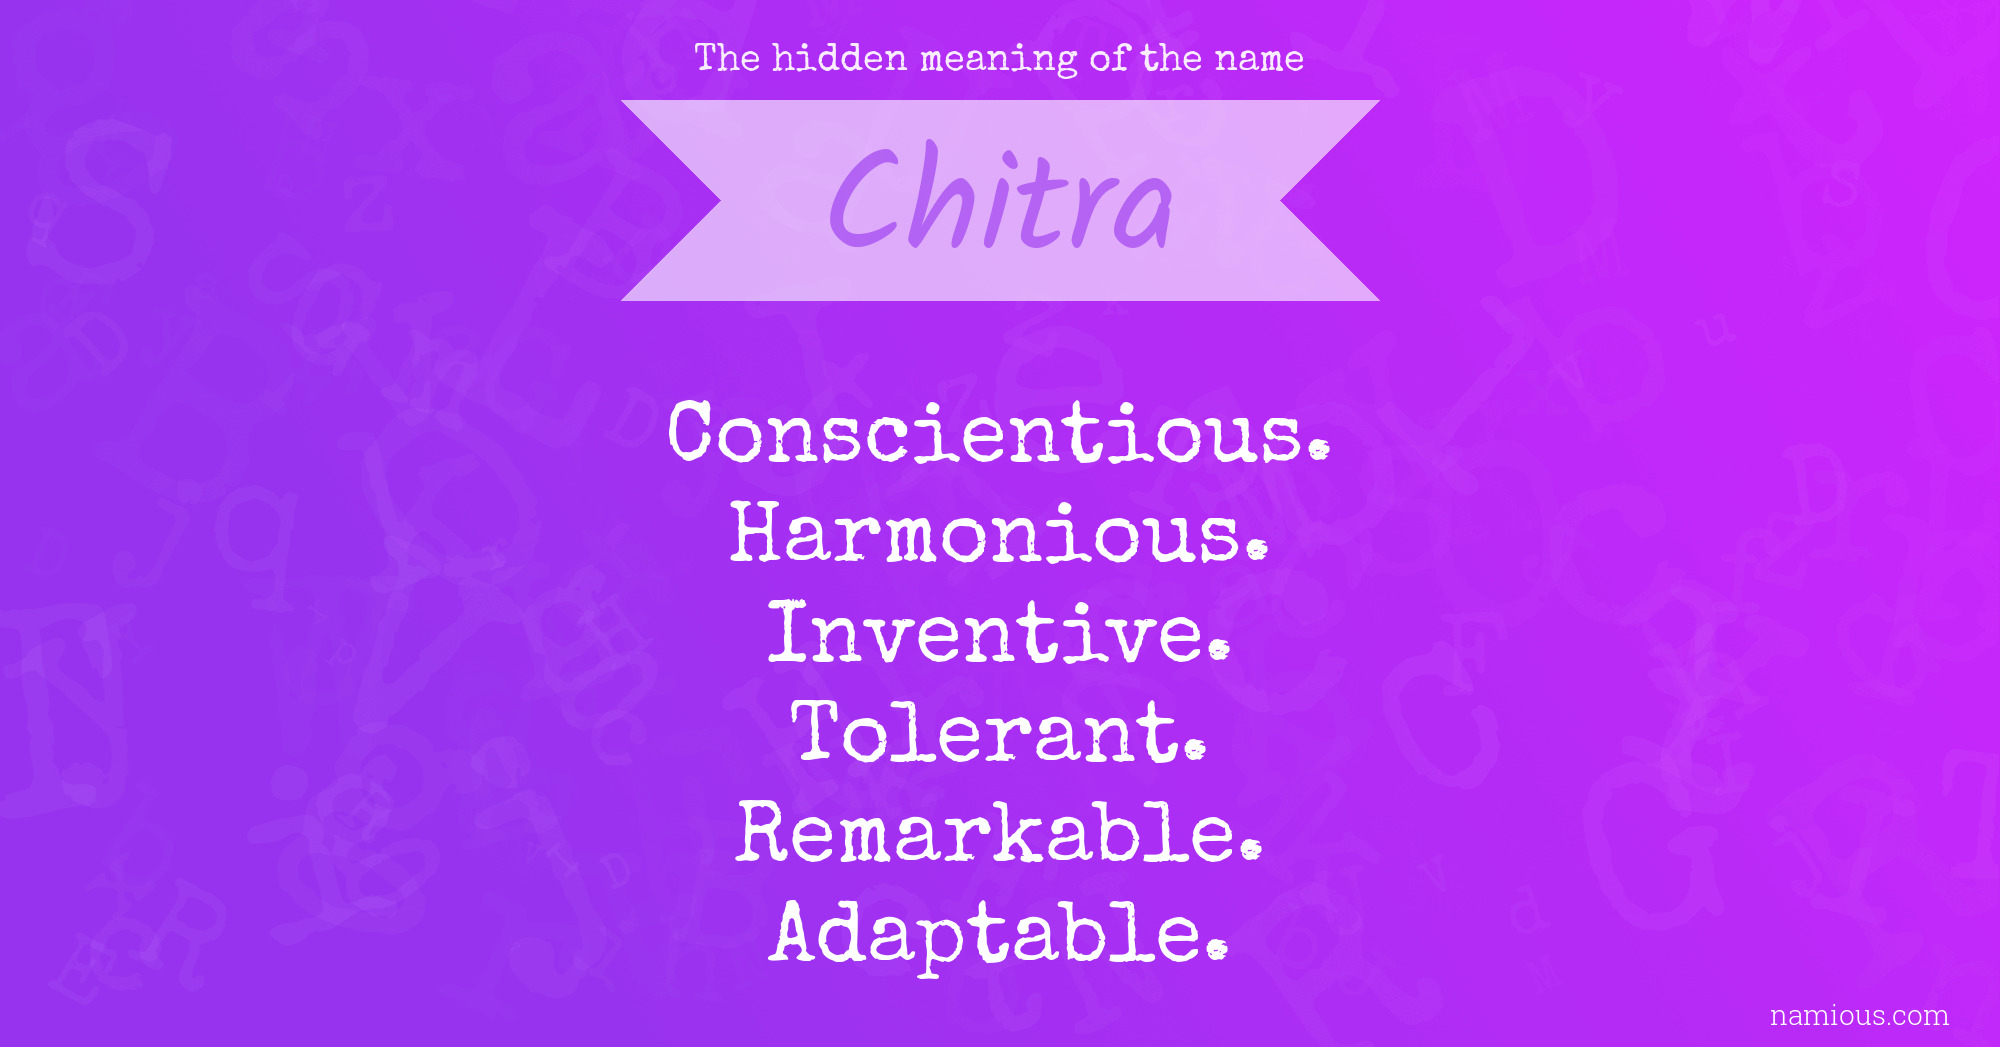 The hidden meaning of the name Chitra